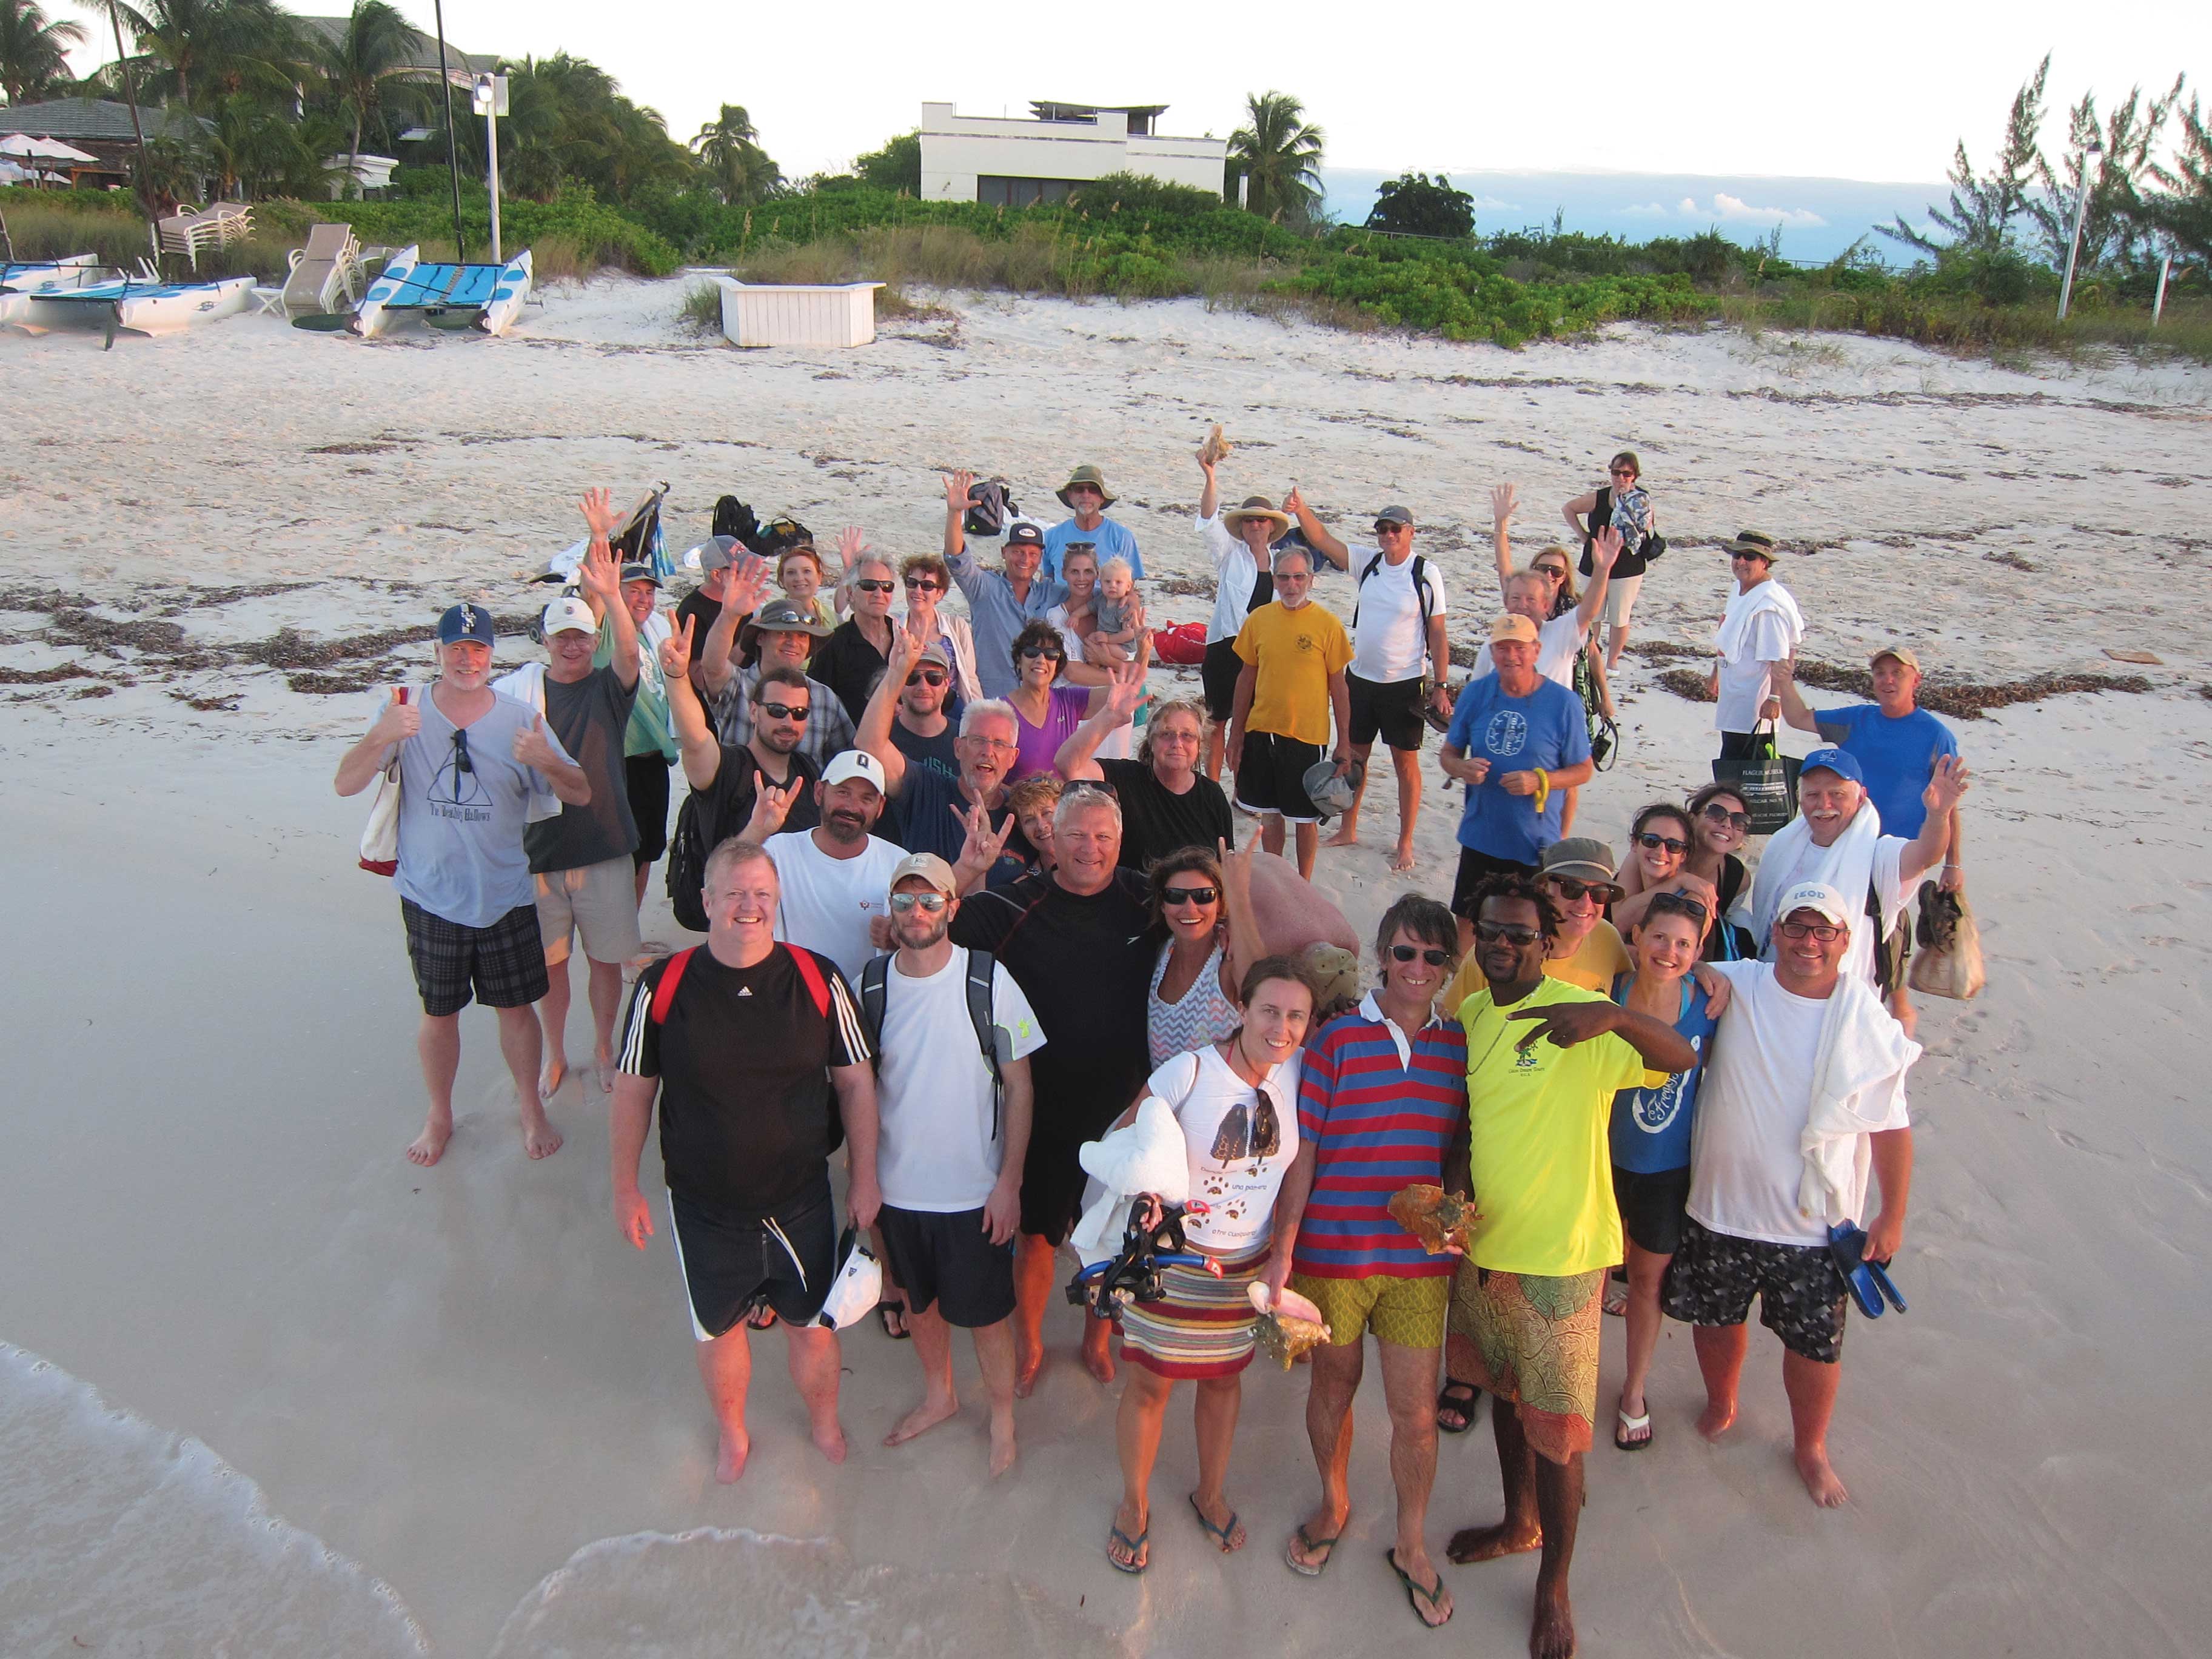 about forty people stand together on a beach and wave to a camera